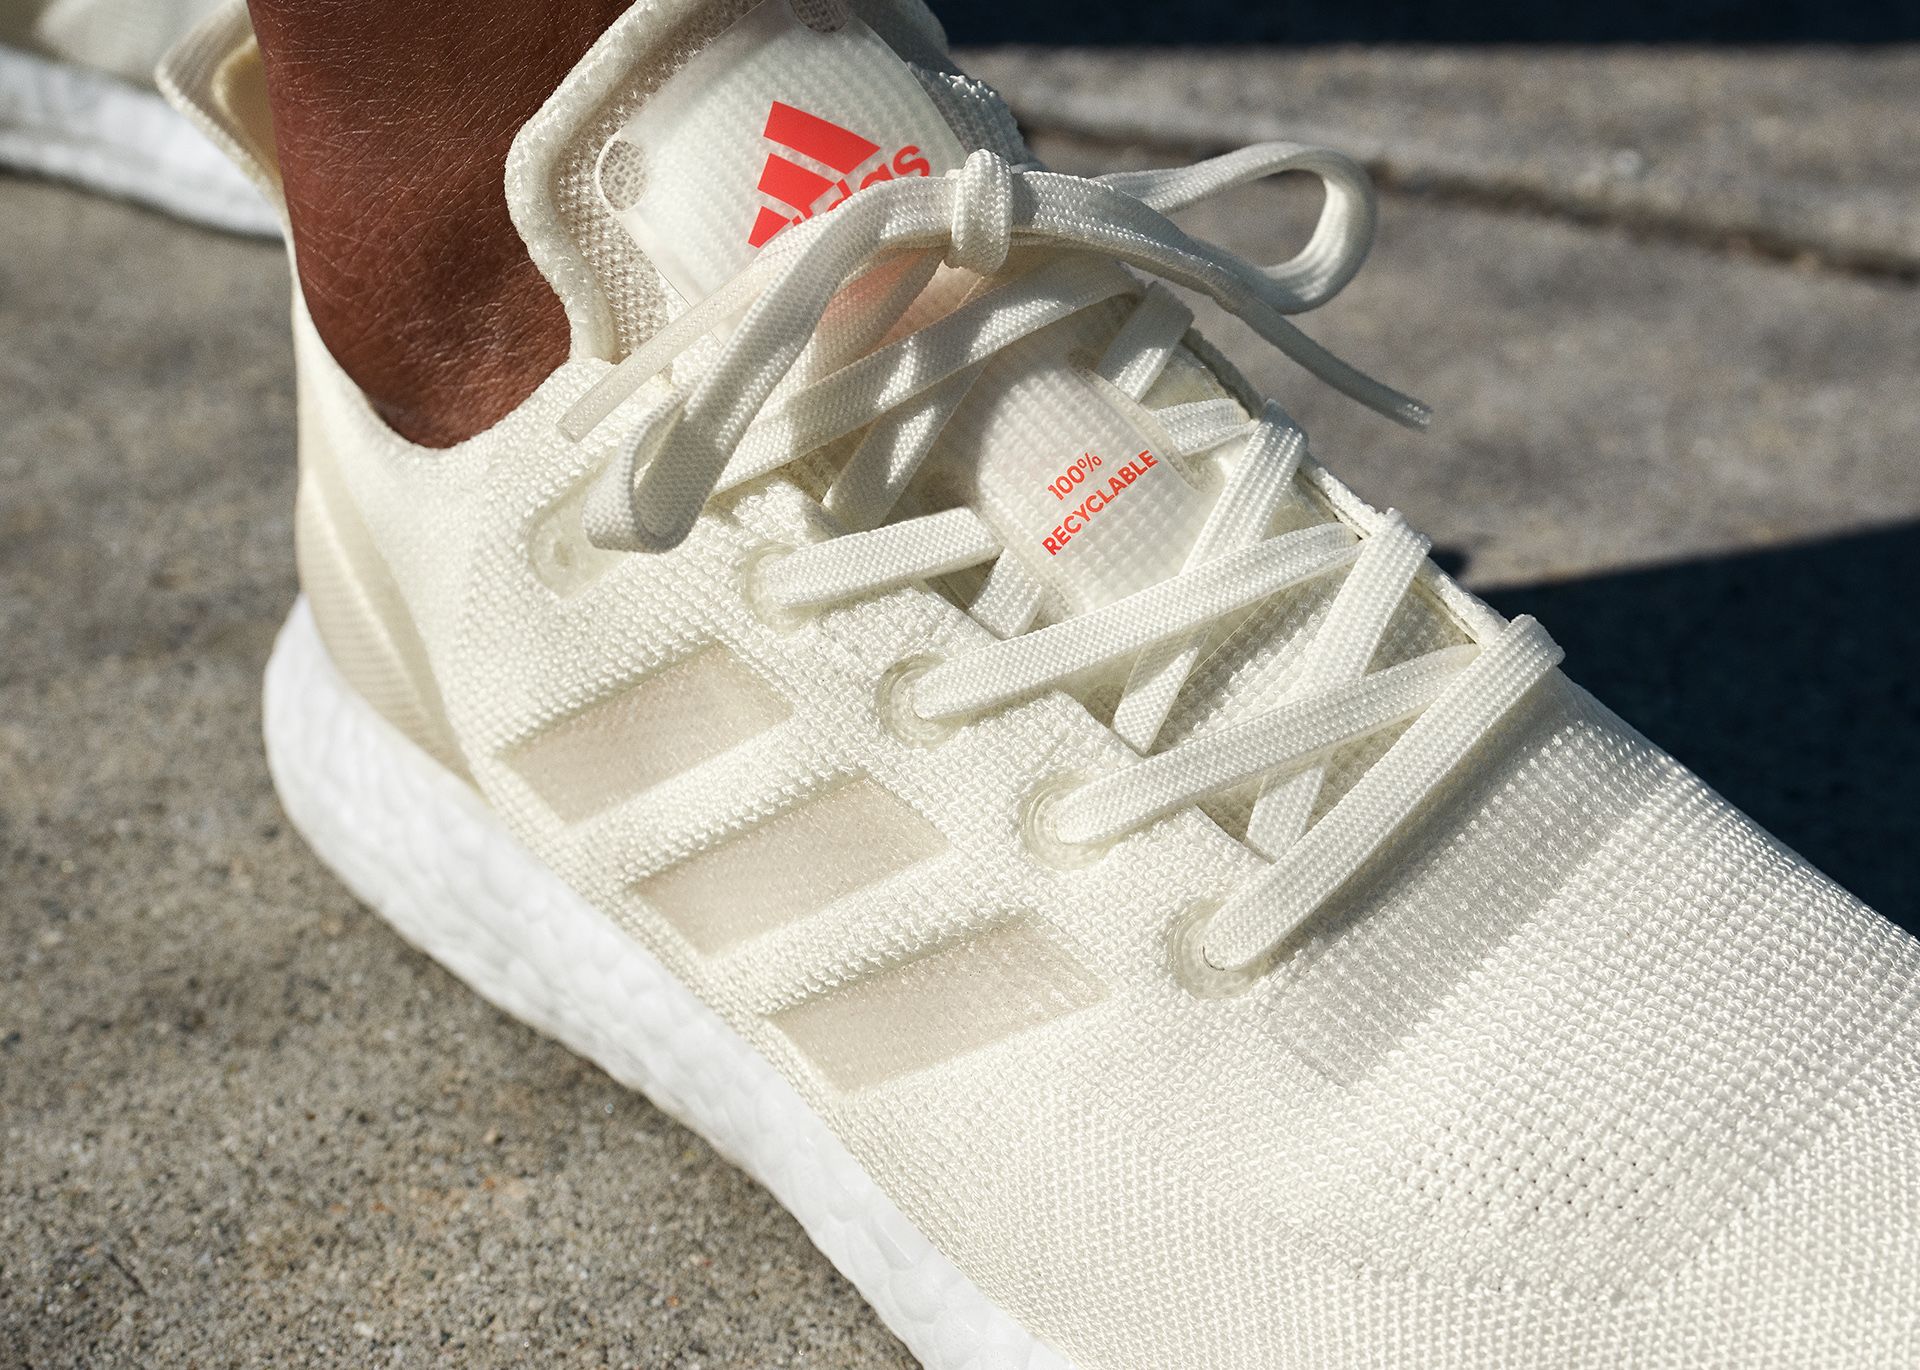 Adidas is making a recyclable shoe CNN Business